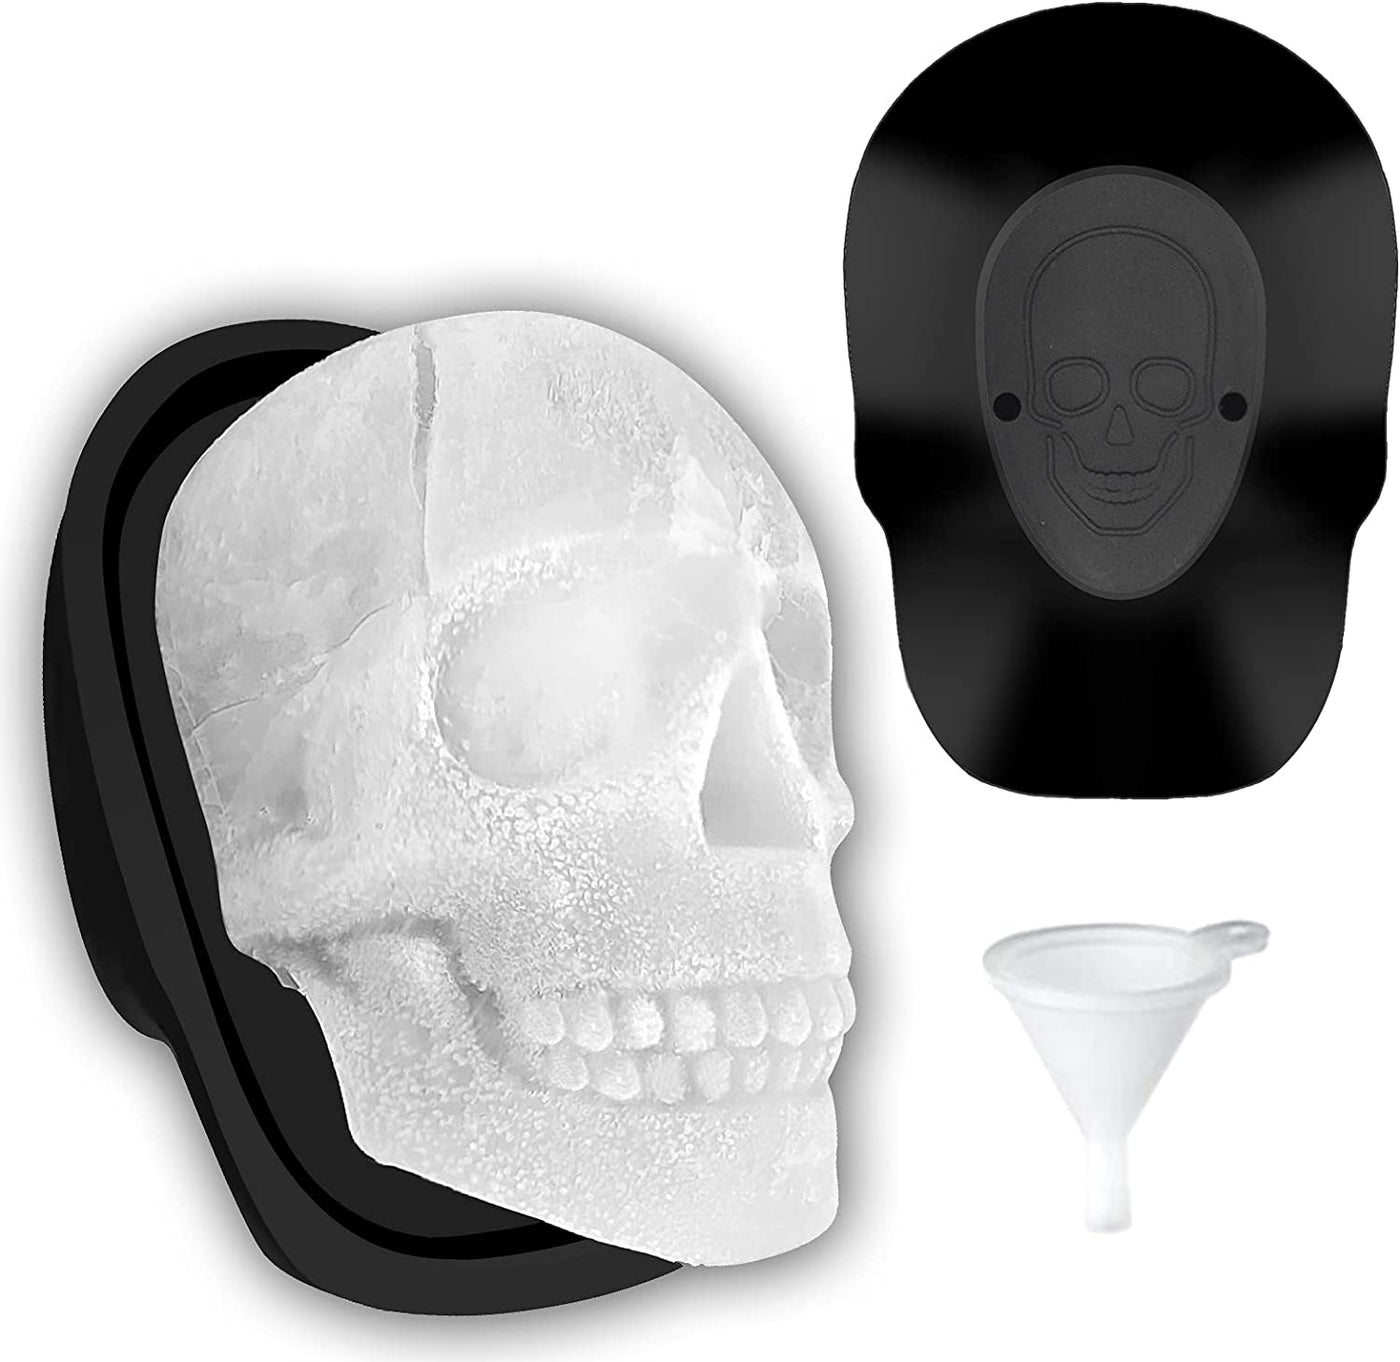 Extra Large 3D Skull Ice Cube Mold Silicone Ice Molds for Whiskey Skull Ice Cube Trays with Funnel for Big Mouth Cup Skull Ice Maker with Resin Chocolate Sugar Whiskey Ice Mold for Parties (1 Pcs)